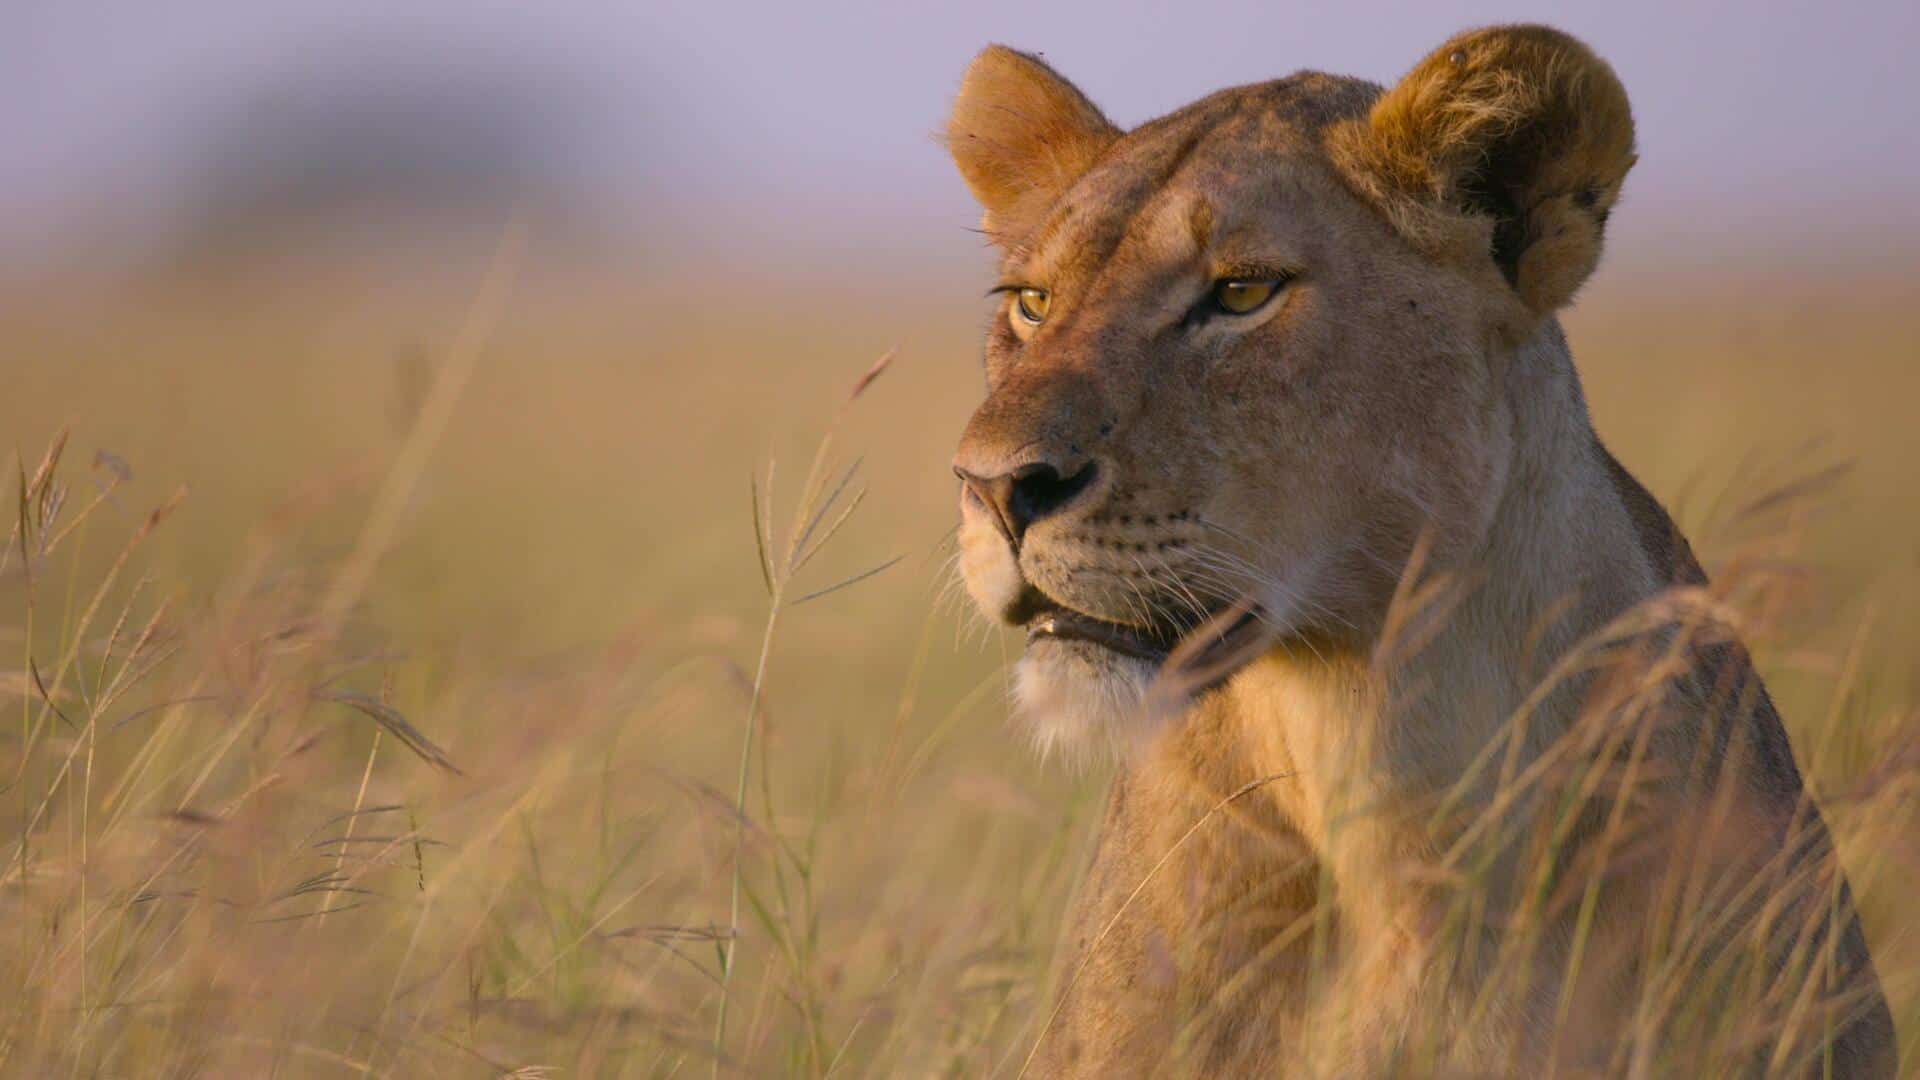 A majestic lioness gazes at something in this image from Silverback Films.